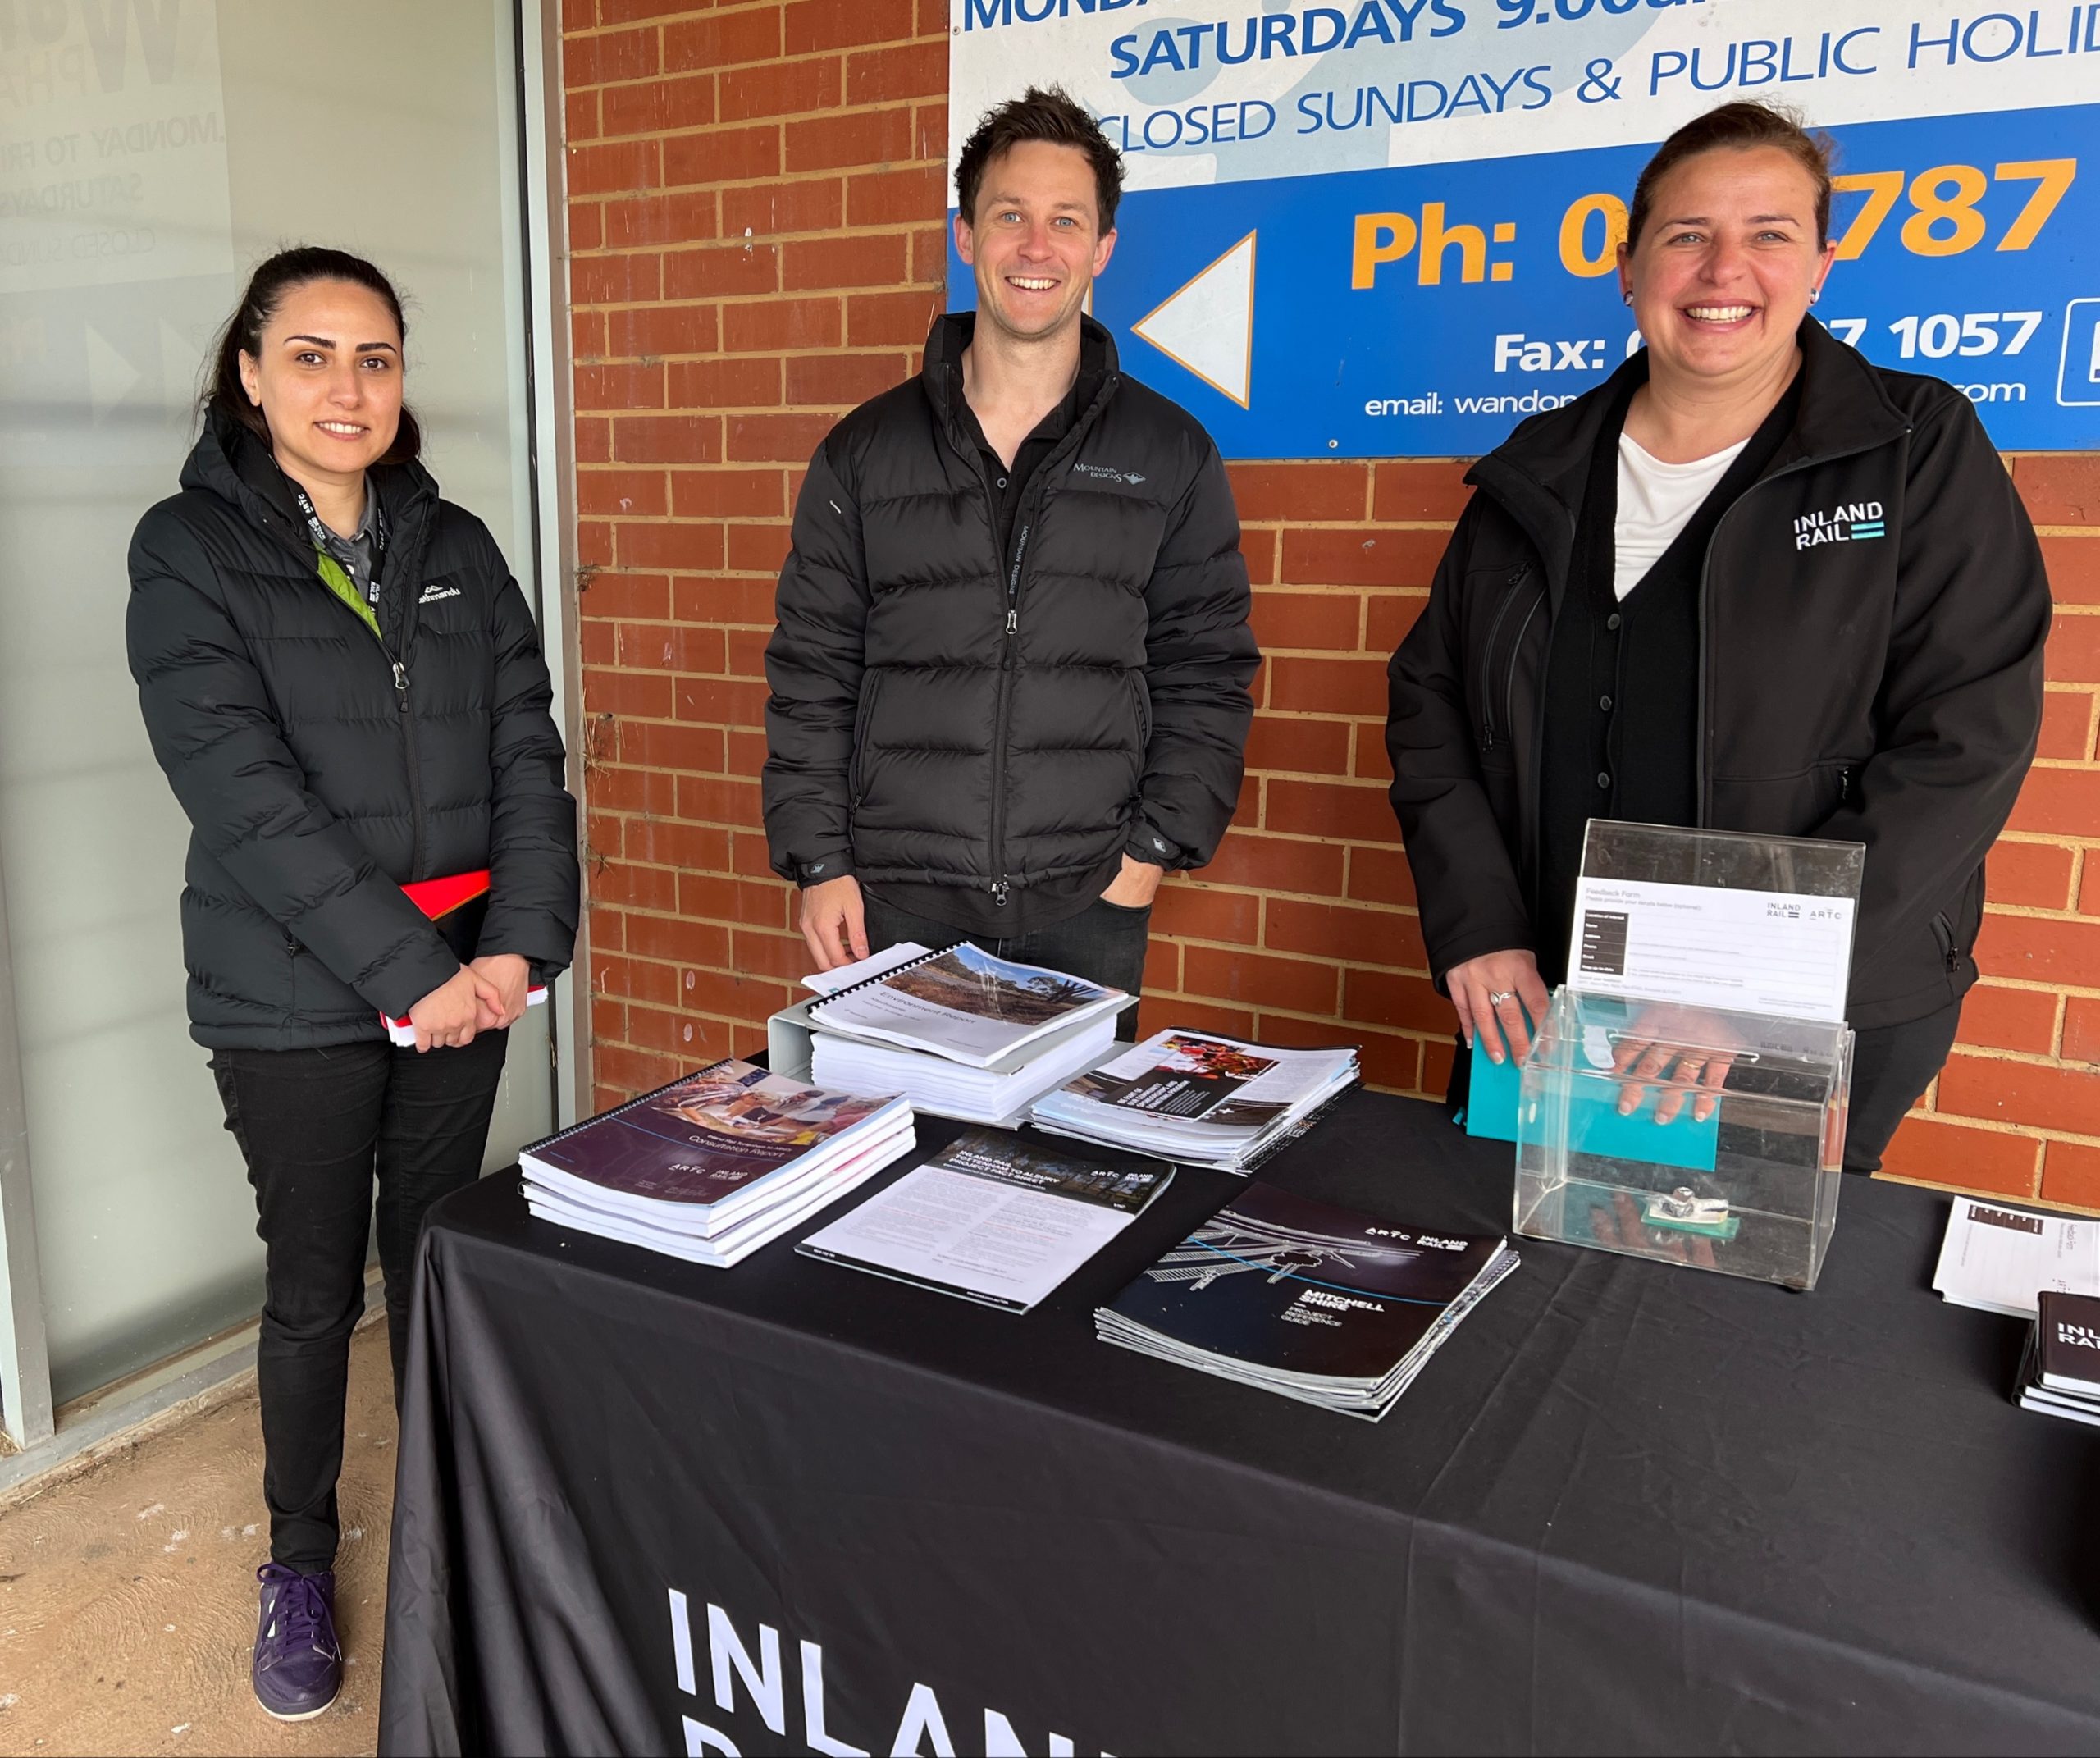 ARTC Inland Rail staff hosting a Tottenham to Albury Enviironment Report consultation stand in Wandong